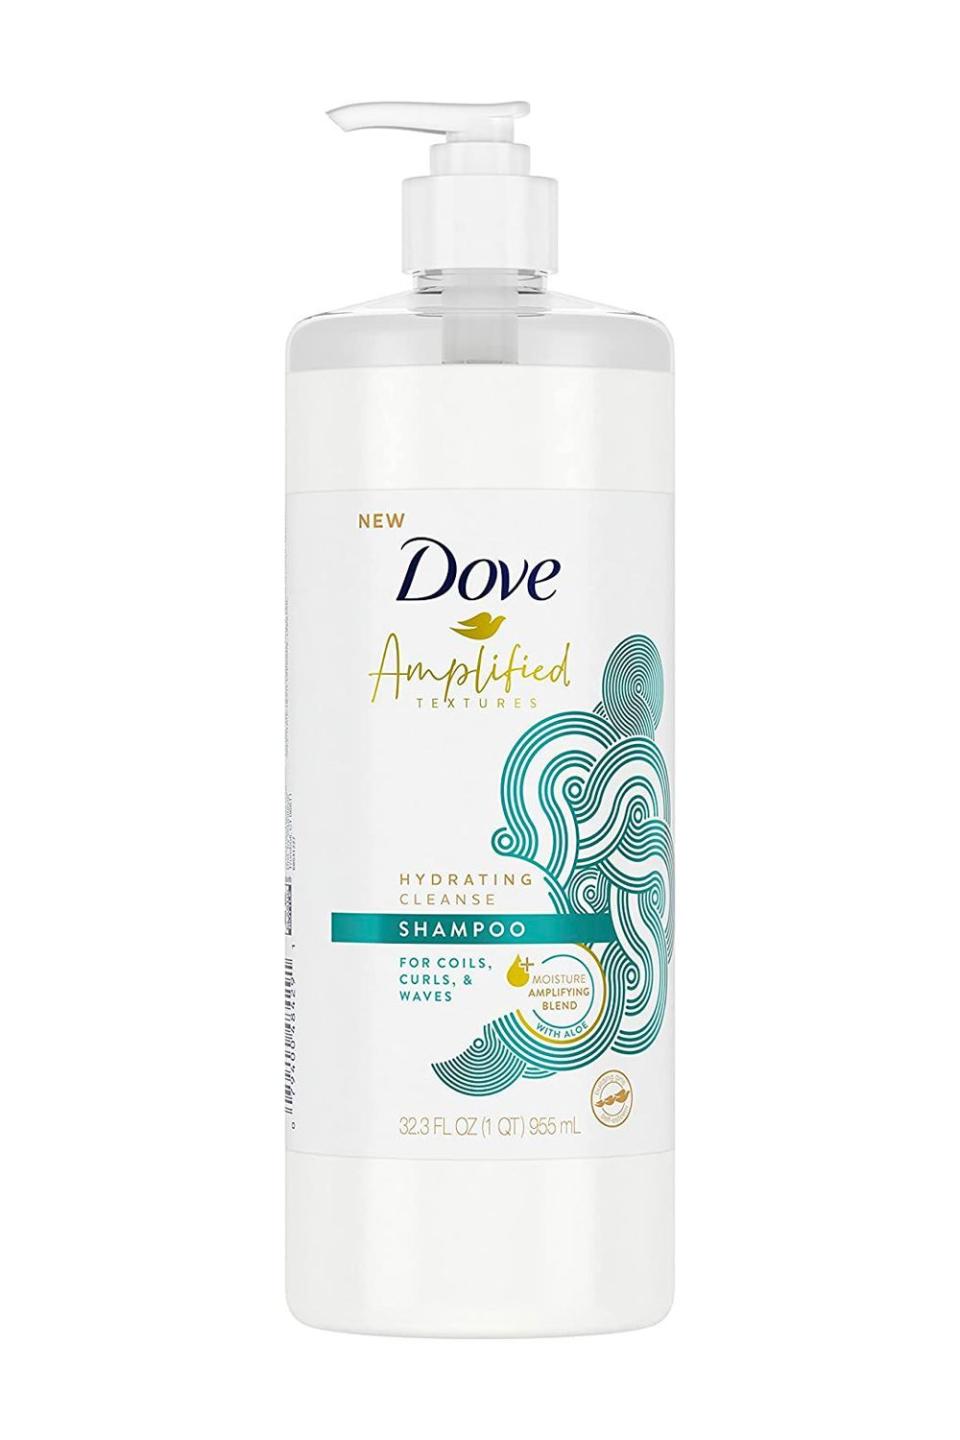 18) Dove Amplified Textures Sulfate-Free Moisturizing Shampoo for Coils, Curls, and Waves